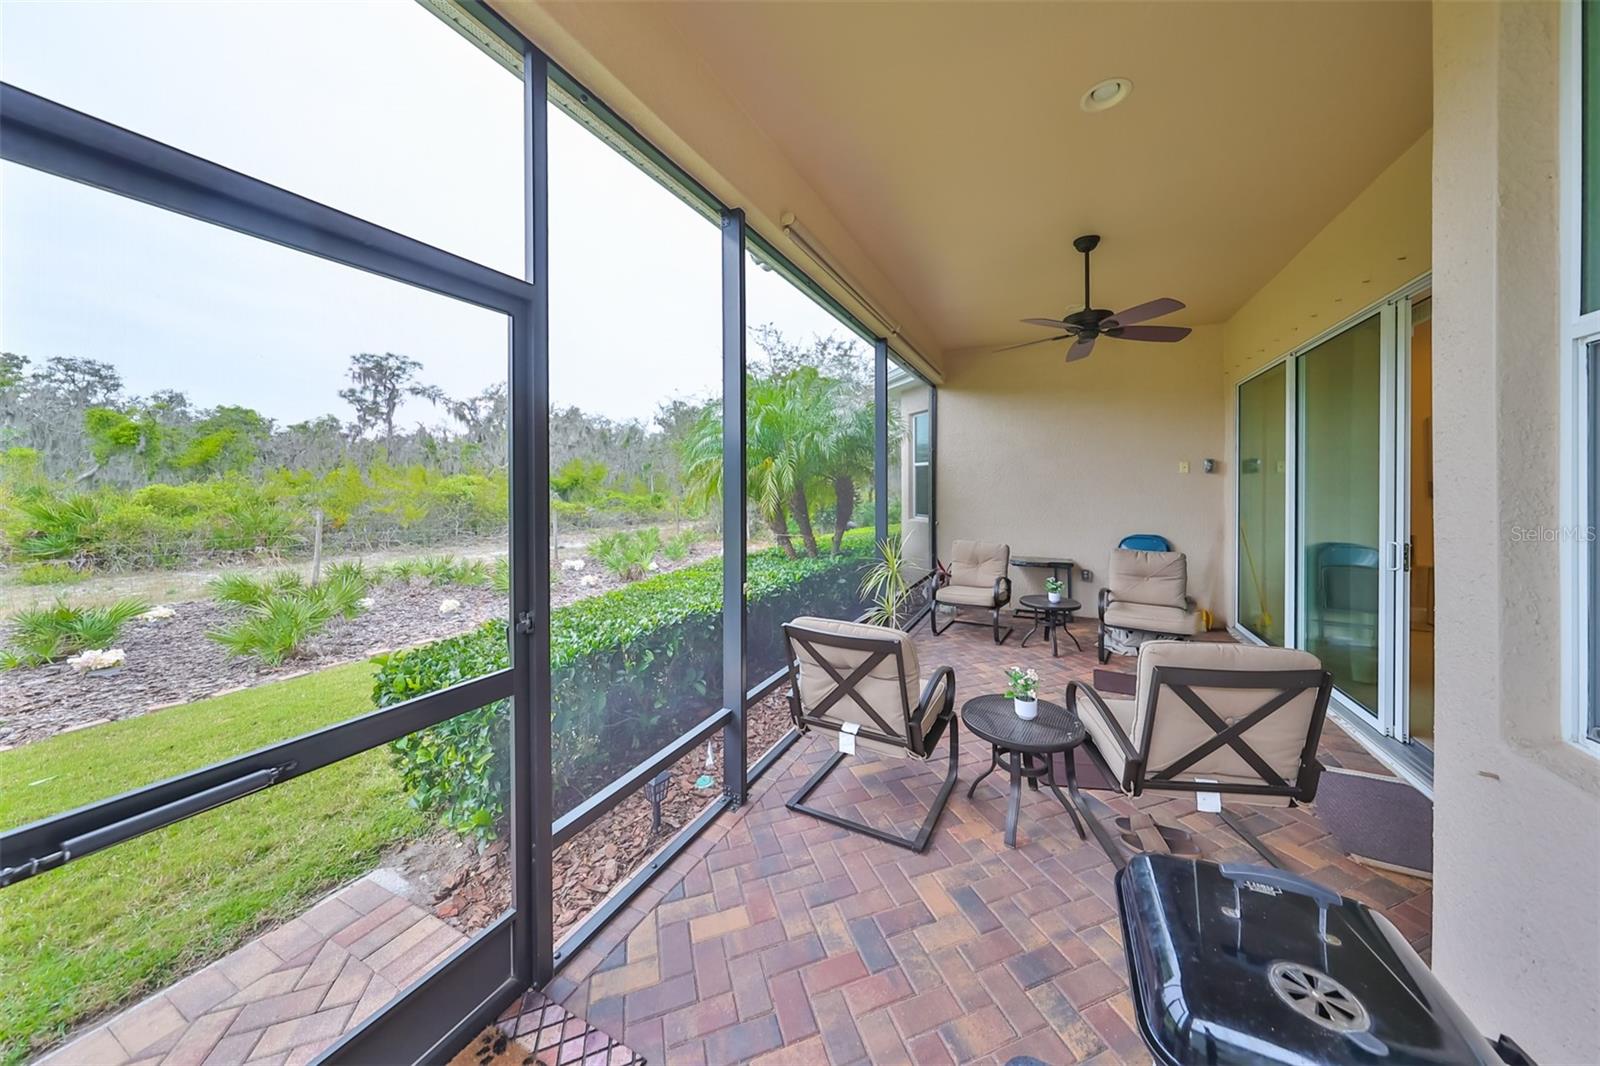 Enclosed screened rear Lanai has custom pavers and lots of privacy, as the home backs up to the Manatee State Park.  There are no concerns about neighbors building behind you.